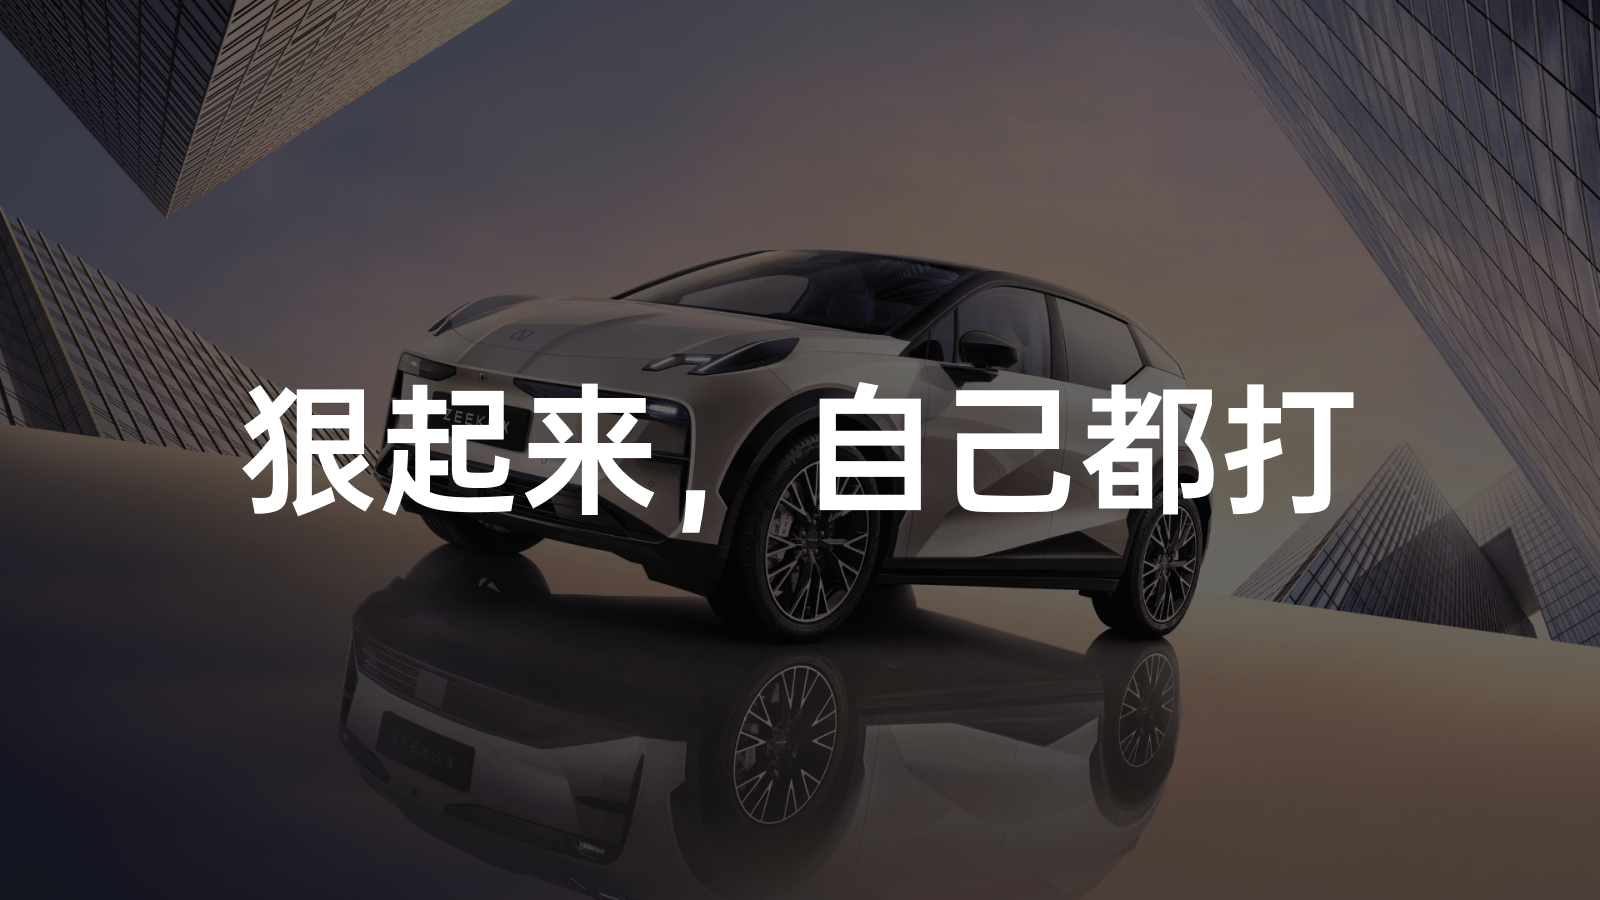 Breaking barriers: The new Zeekr X electric SUV undercuts major competitors at just under 21,000 yuan